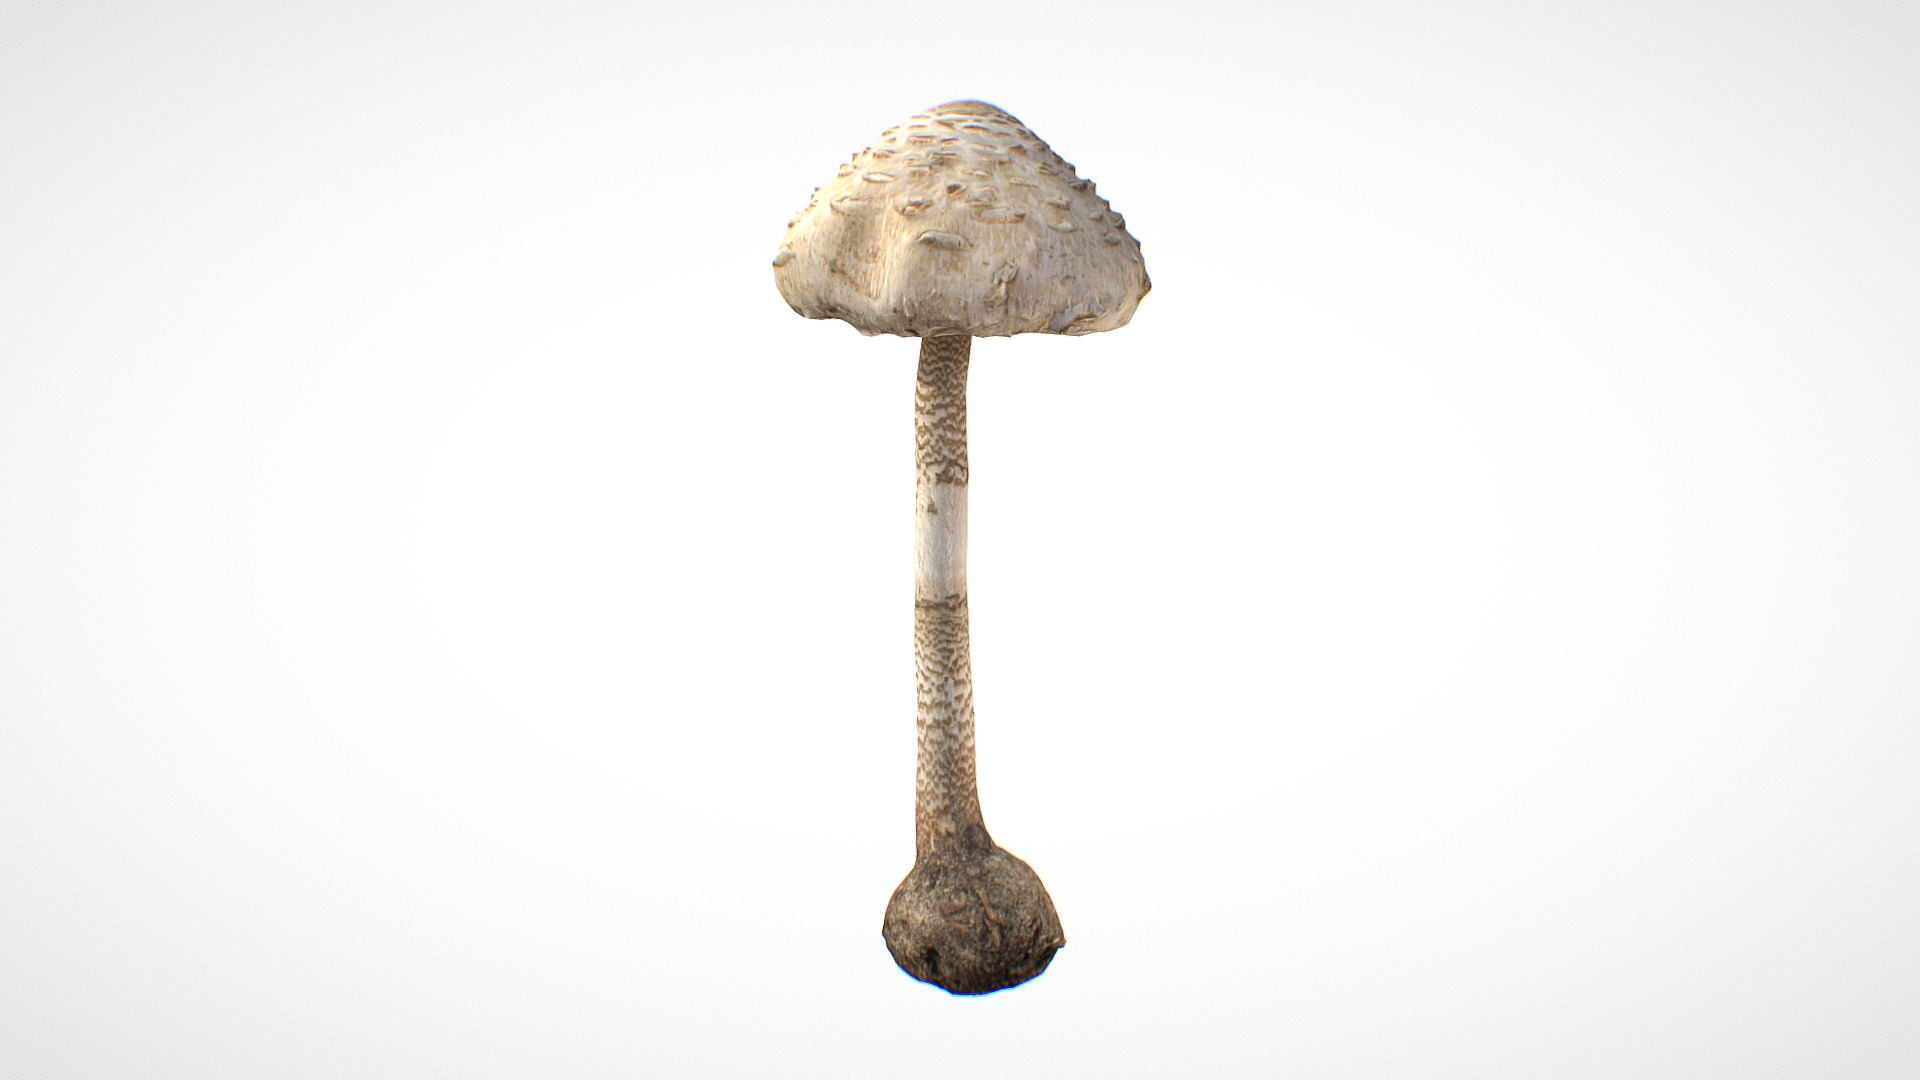 3D model Parasol mushroom 6 – retopo 8K PBR - This is a 3D model of the Parasol mushroom 6 - retopo 8K PBR. The 3D model is about a mushroom with a white background.